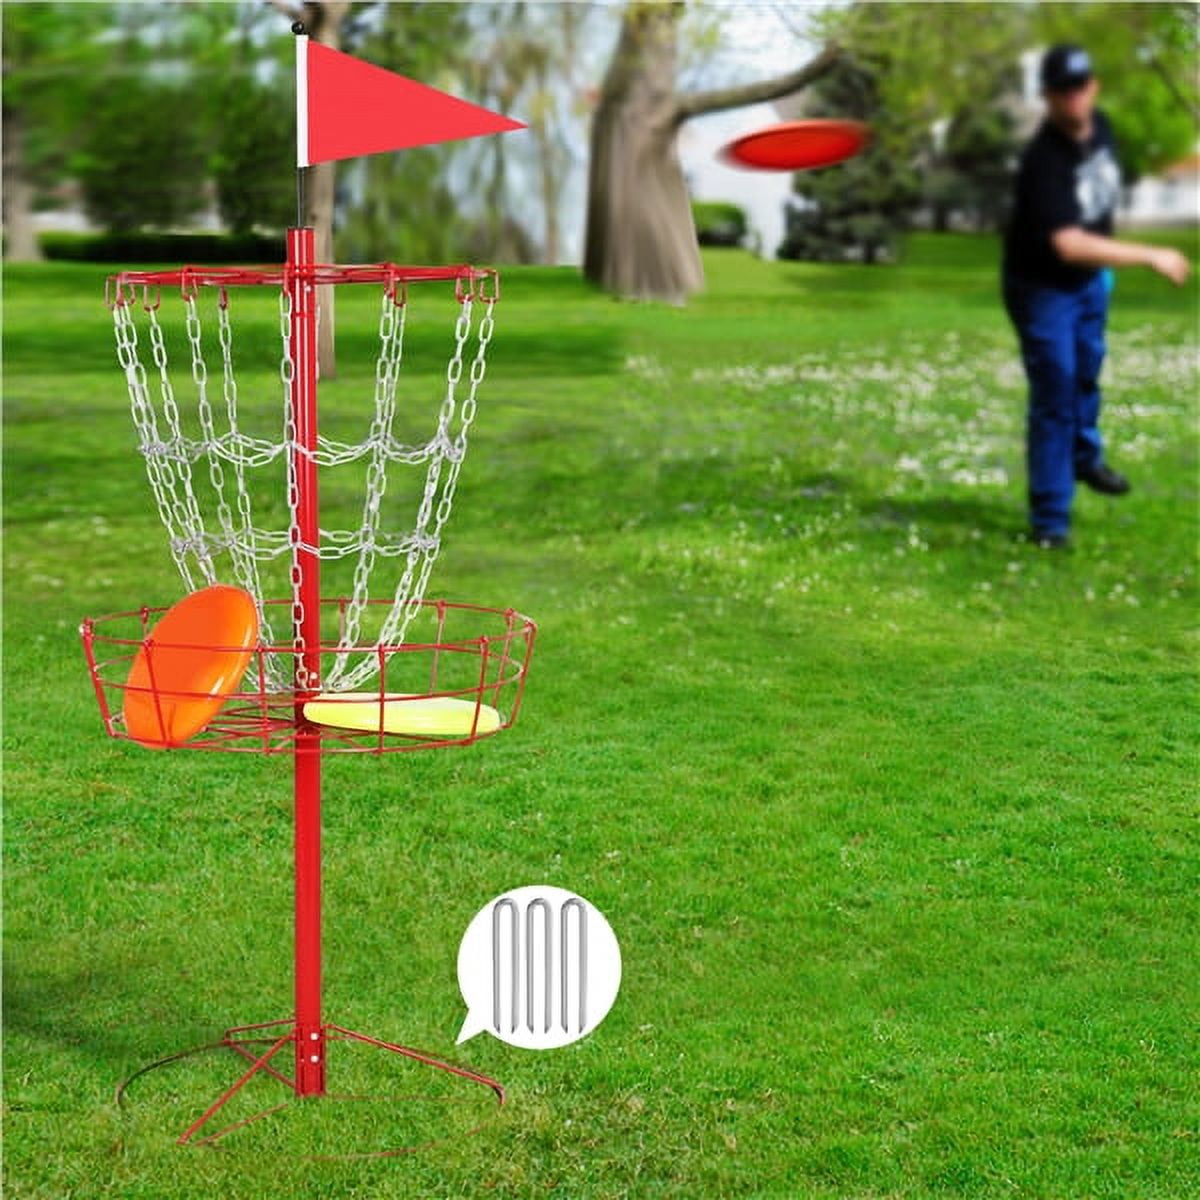 SmileMart 12-Chain Disc Golf Goal for Target Practice, Red